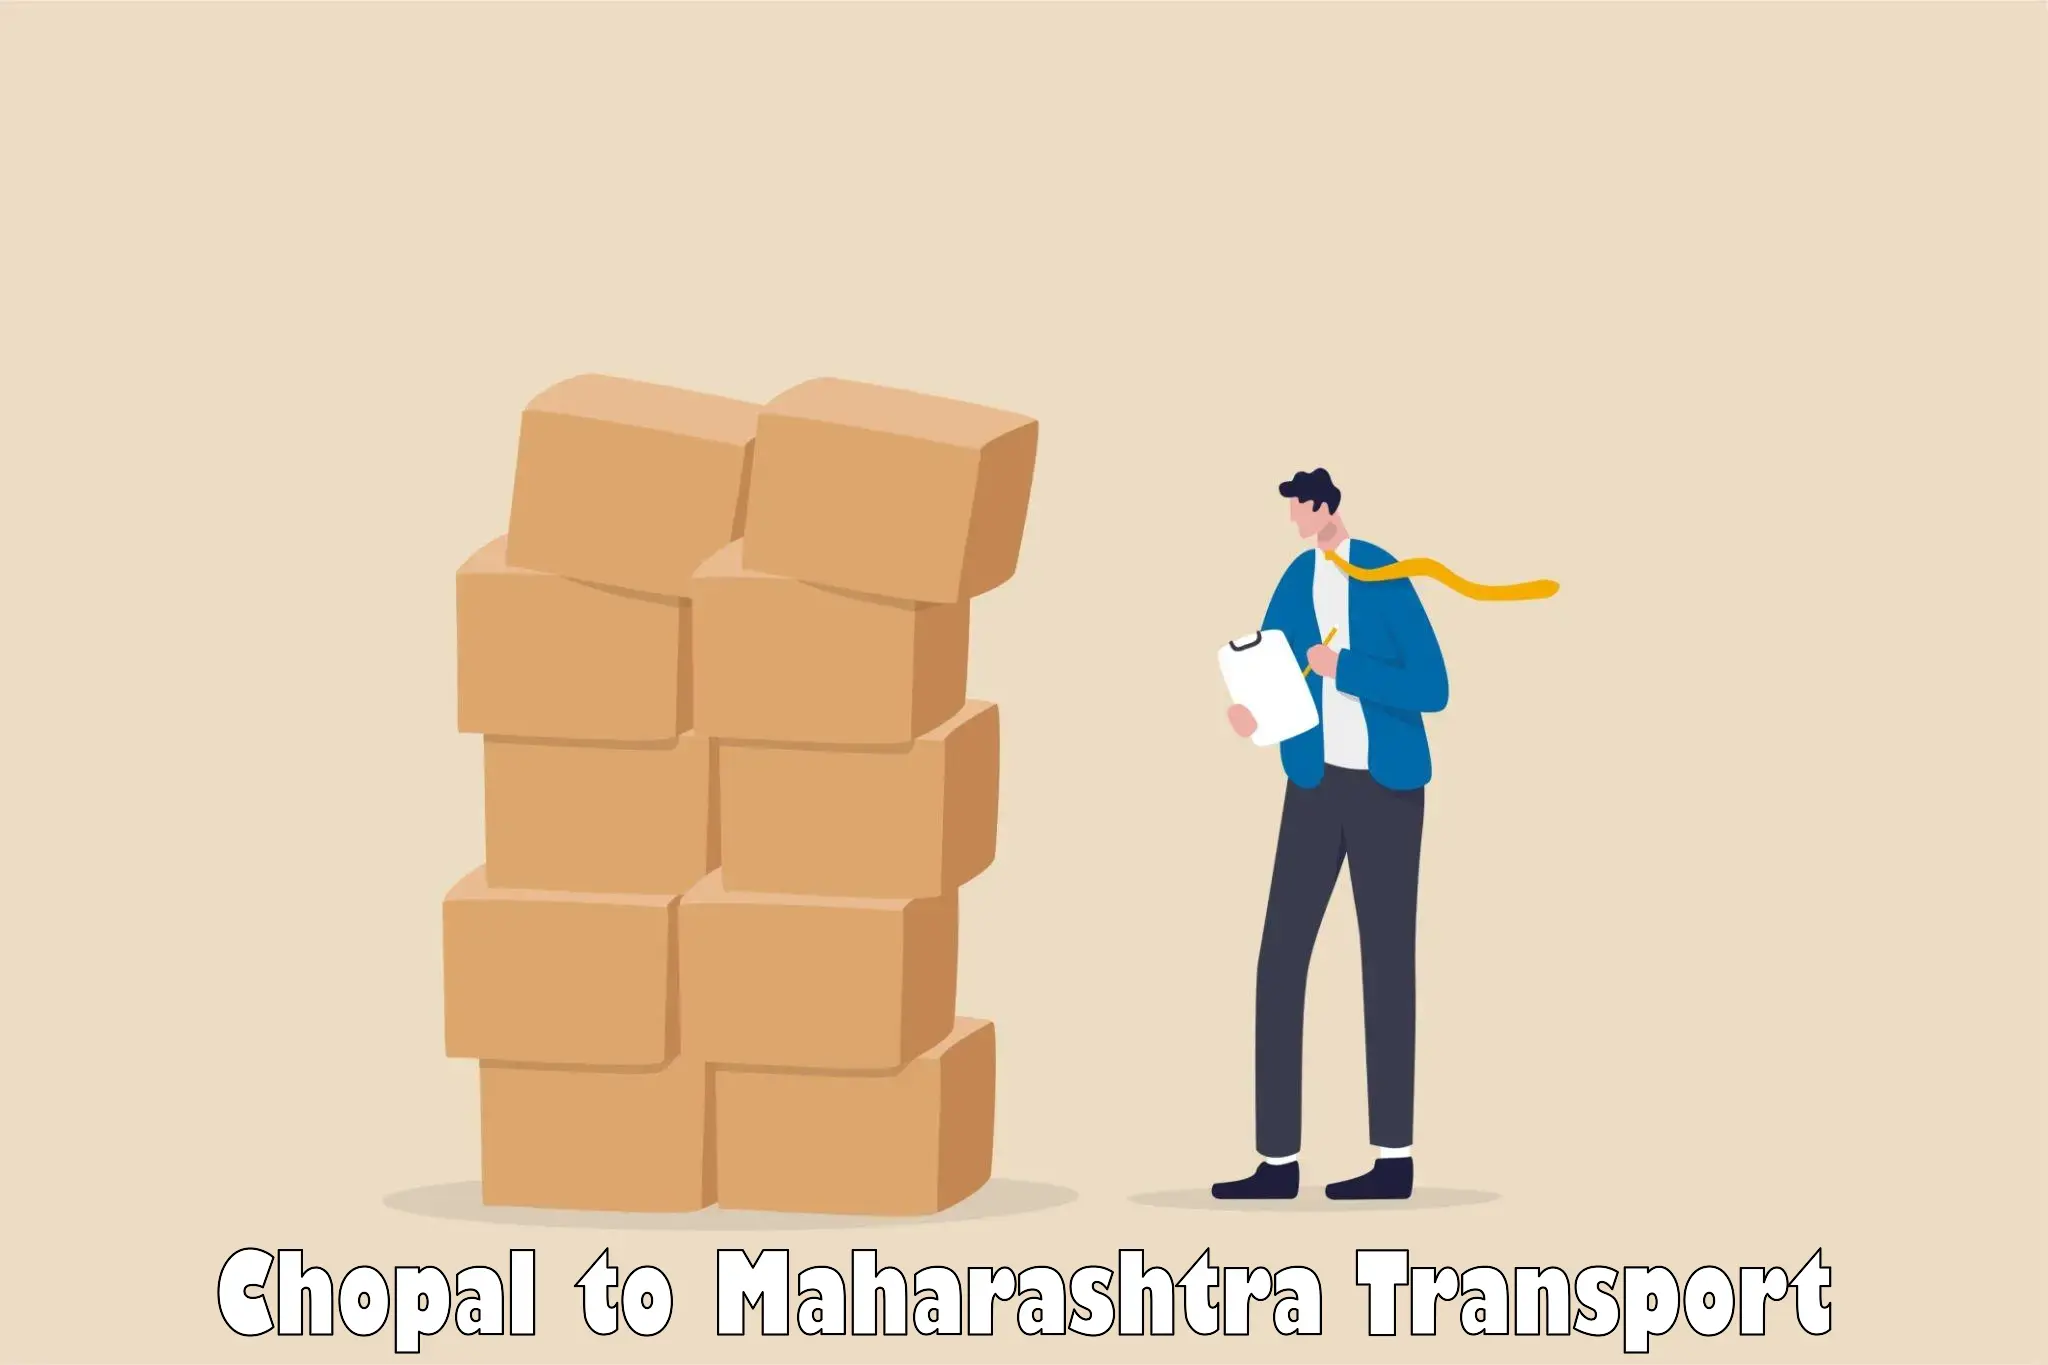 Road transport online services Chopal to Koregaon